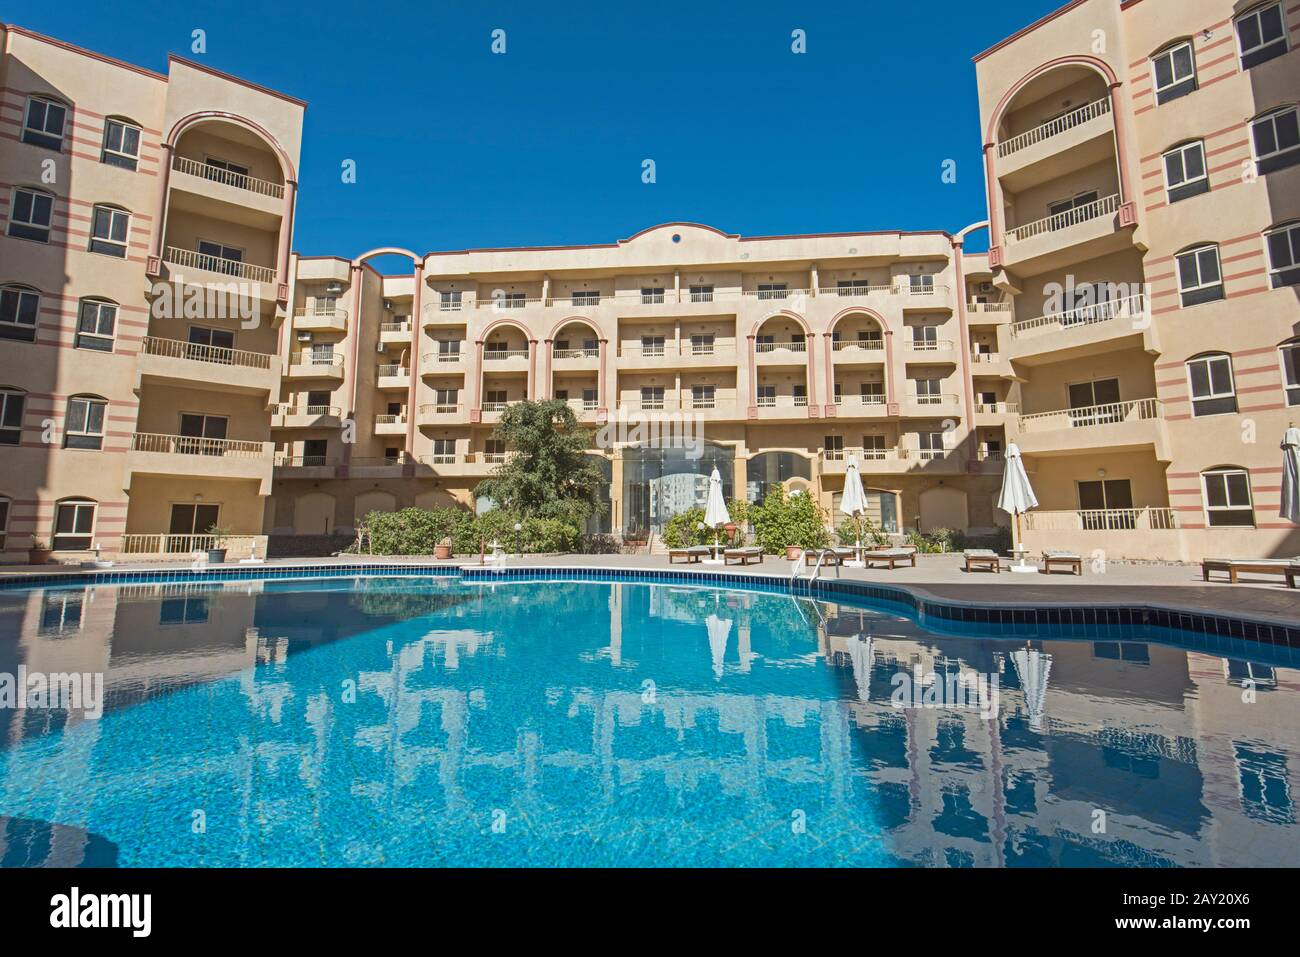 Large swimming pool with at a luxury tropical apartment resort complex Stock Photo